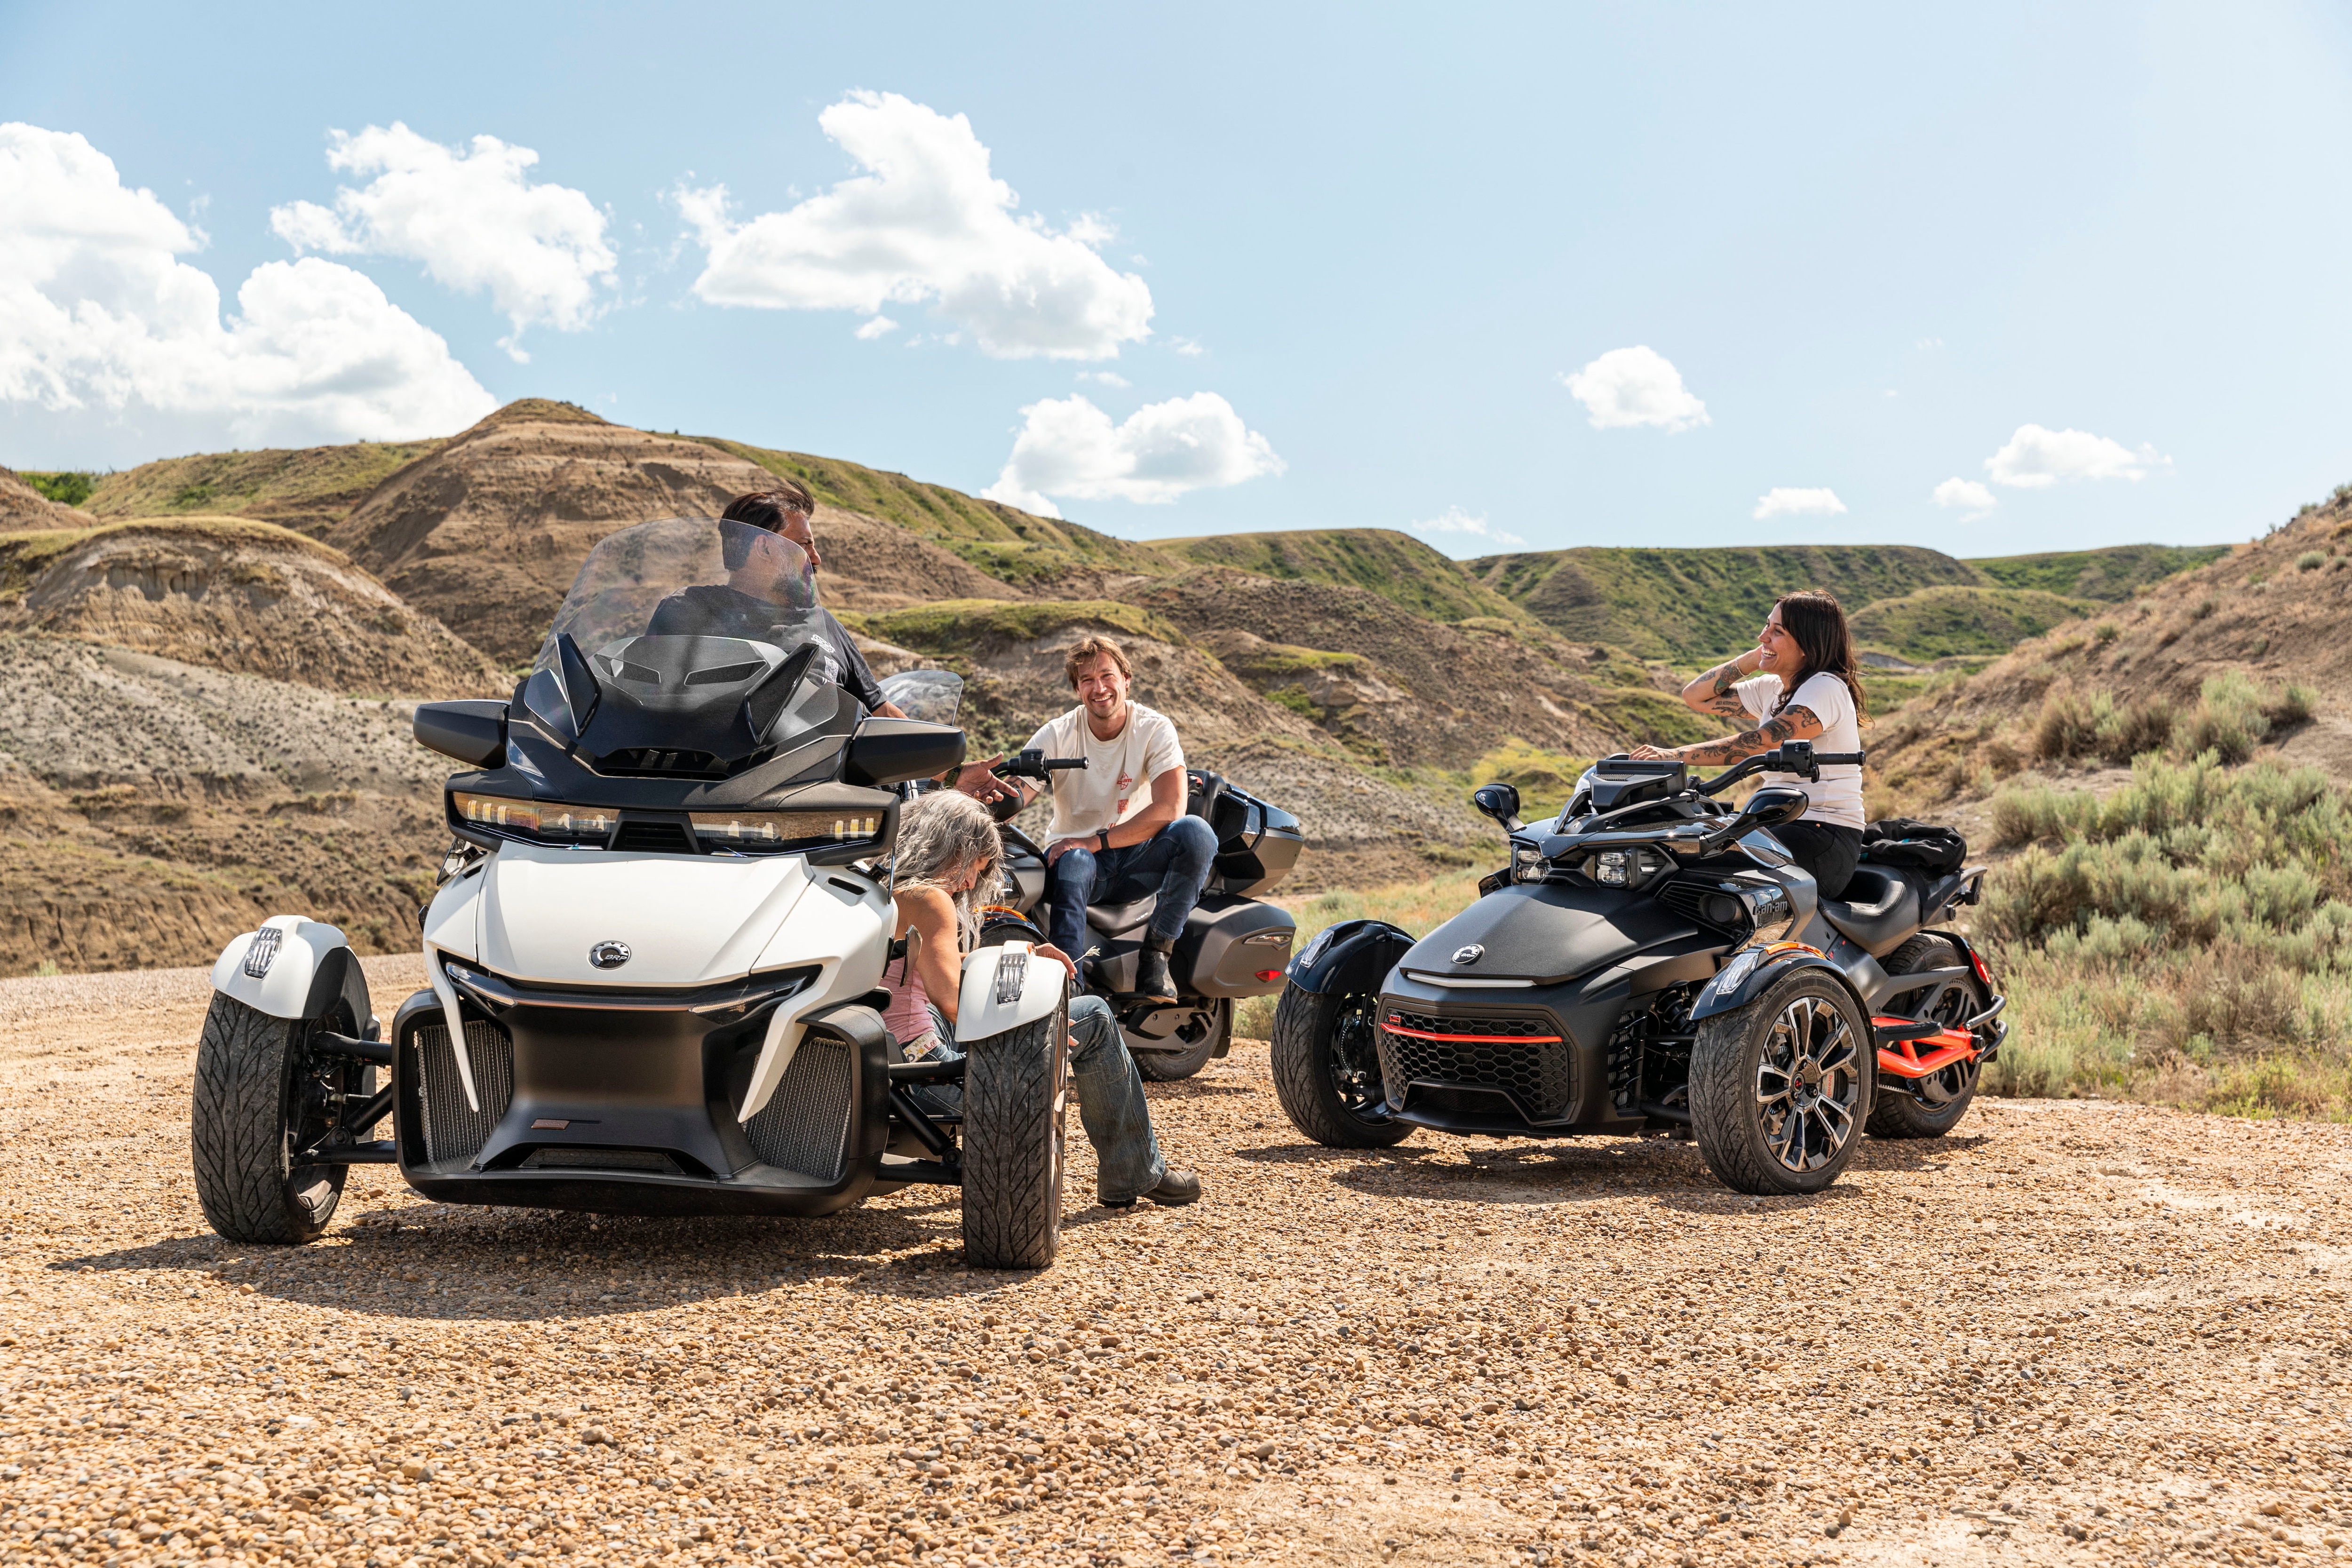 View of three Can-Am Spyder parked in the desert